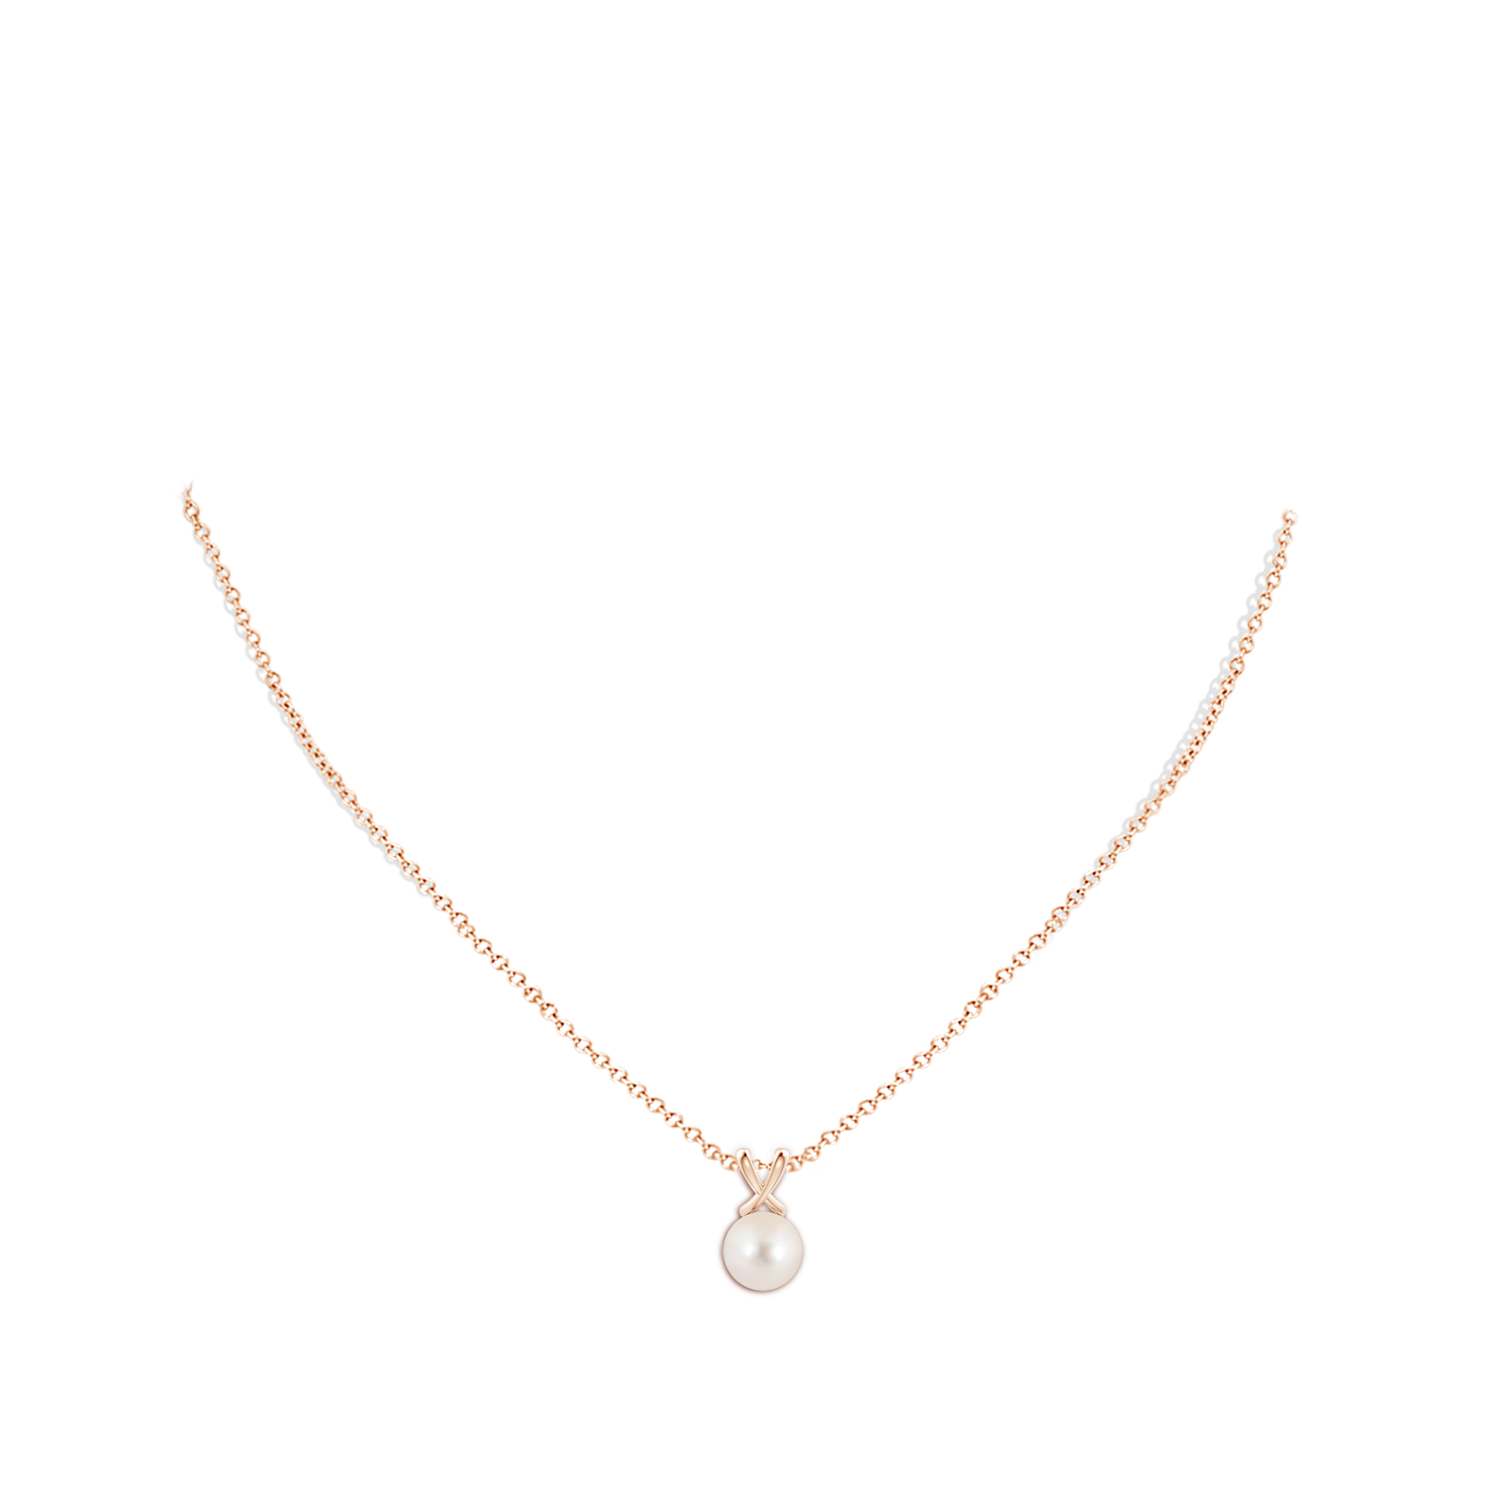 AAAA / 3.7 CT / 14 KT Rose Gold